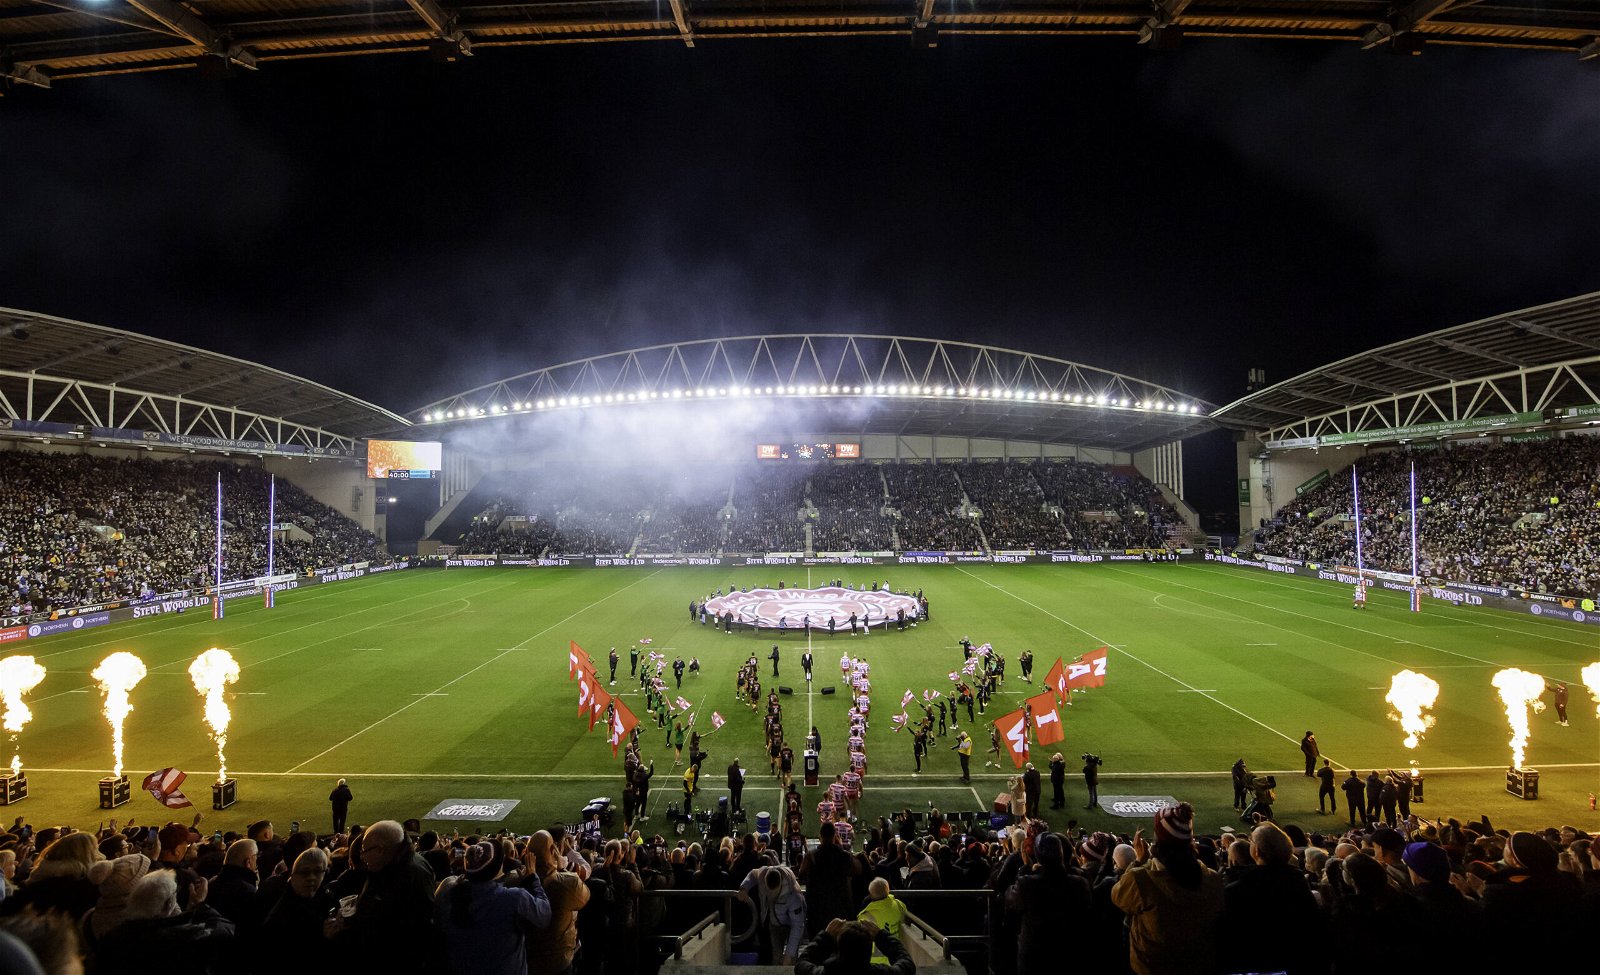 A view of the stand opposite the main stand at DW Stadium before the World Club Challenge 2024. Players are walking out, a fire display can be seen, and the stands are full.